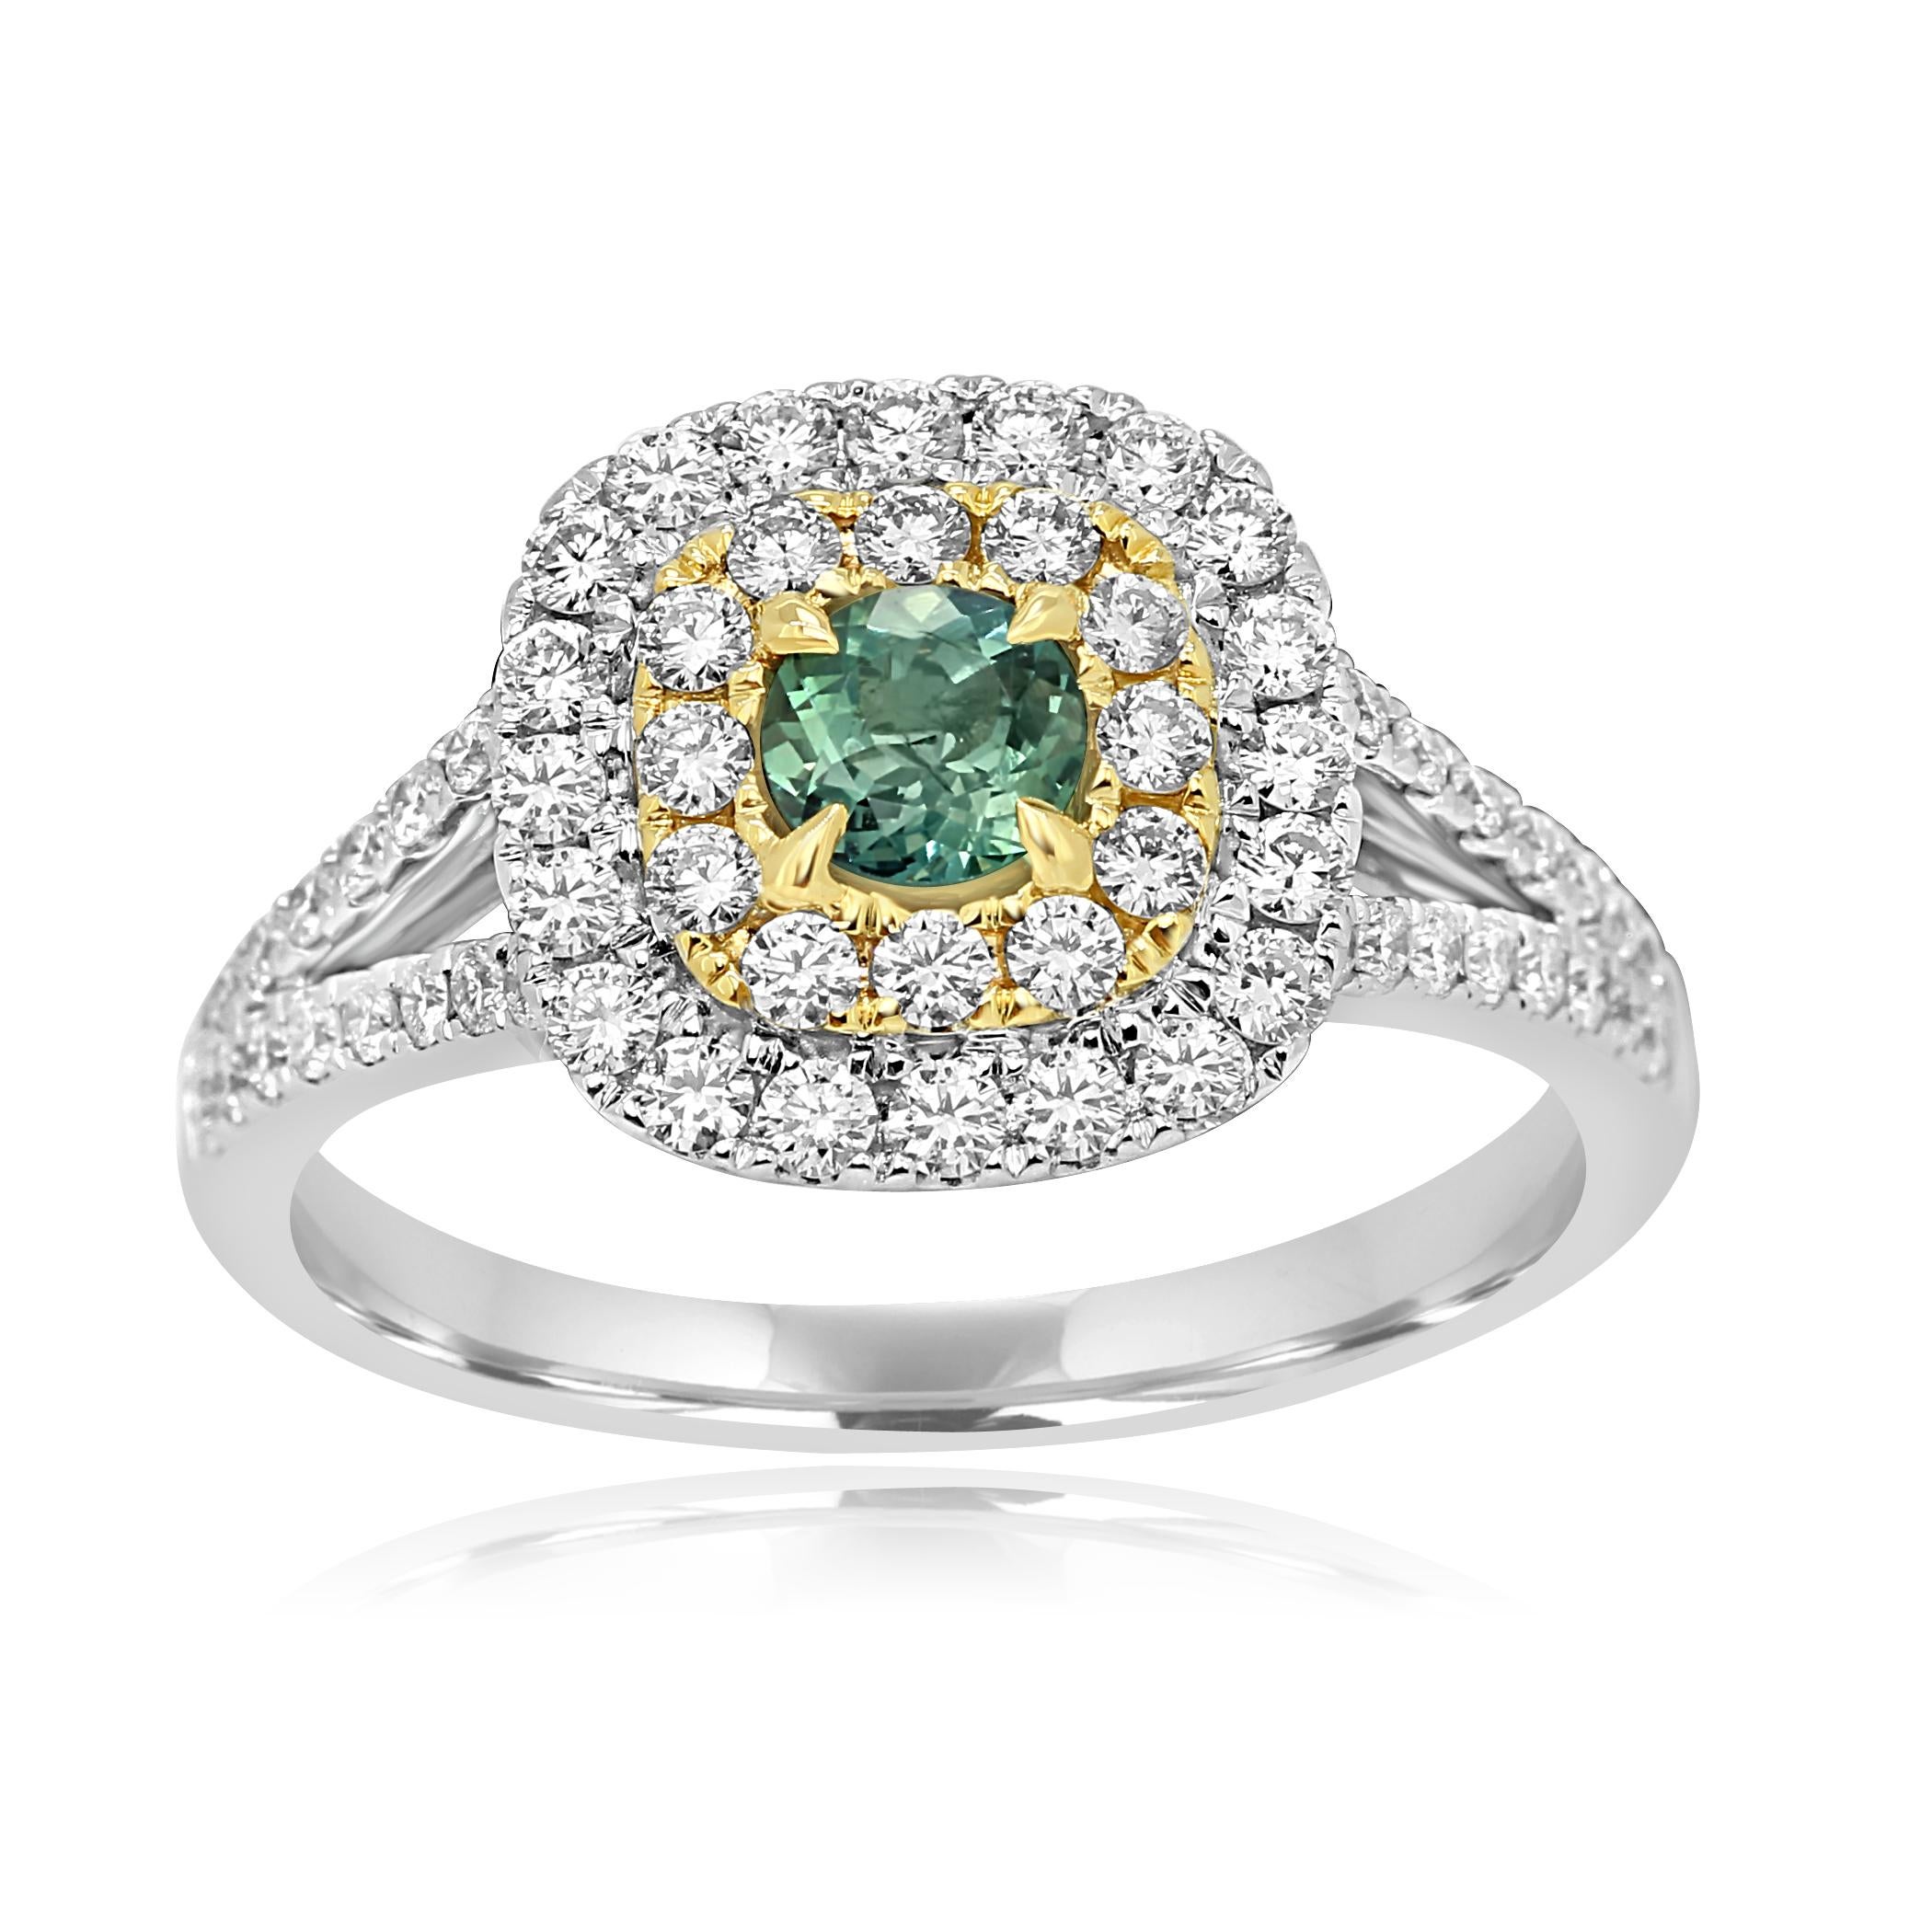 Alexandrite Round 0.34 Carat Encircled in Double Halo of White Round Diamonds 0.65 Carat in 14K White and Yellow Gold Split Shank Stunning Bridal as well as Fashion Ring.

Style available in different price ranges. Prices are based on your selection